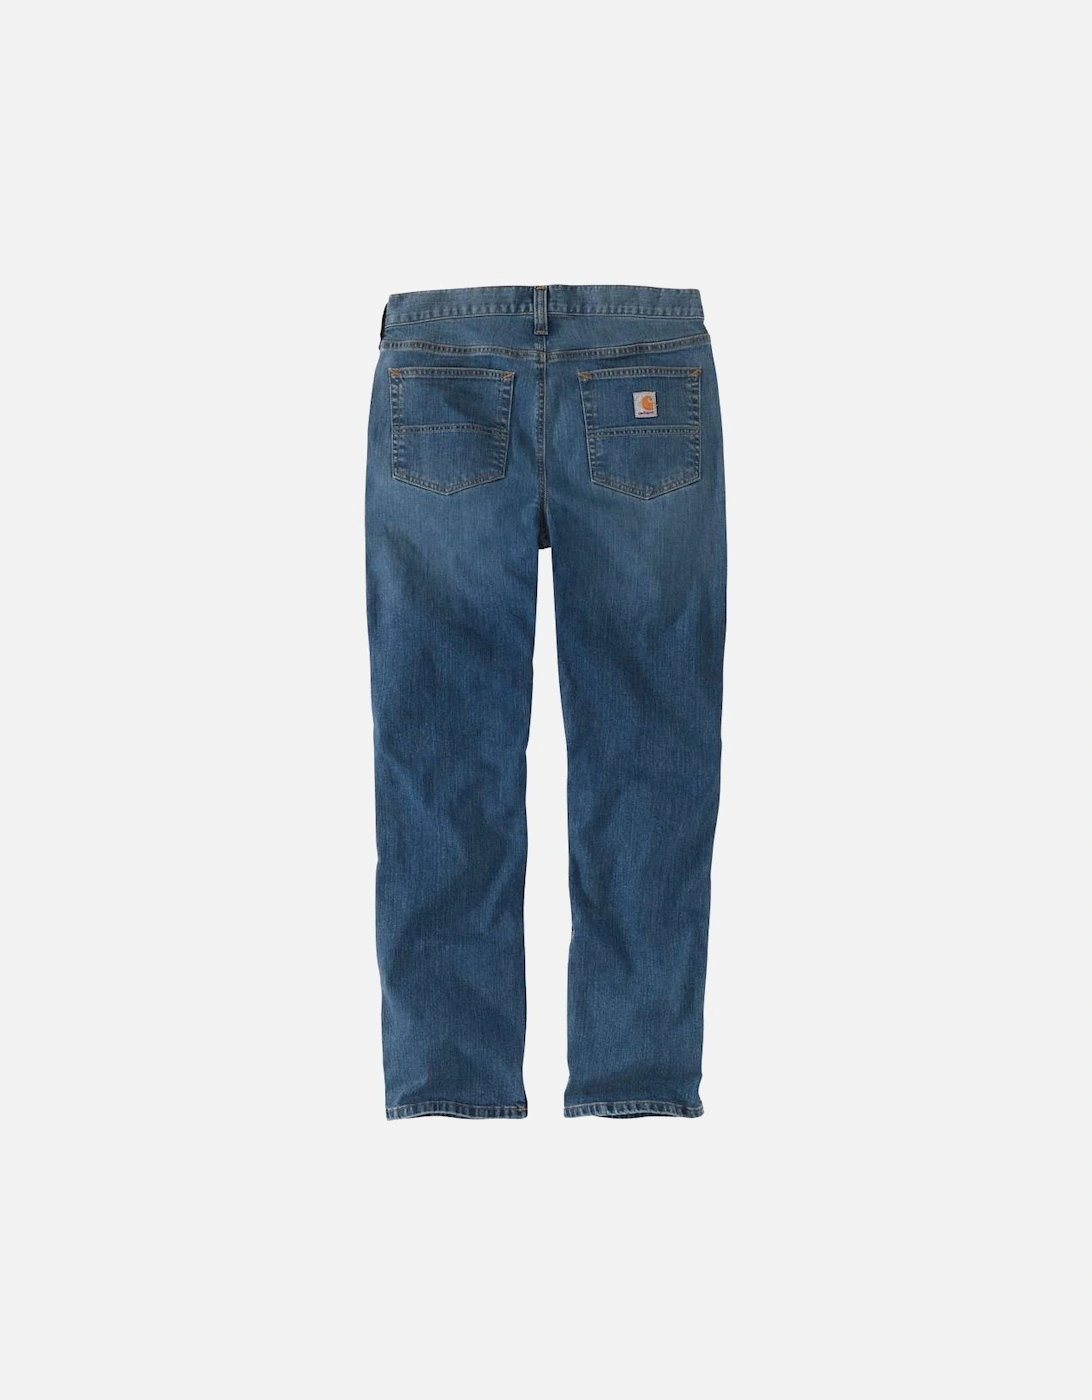 Carhartt Mens Rugged Flex Relaxed Fit Tapered Jeans